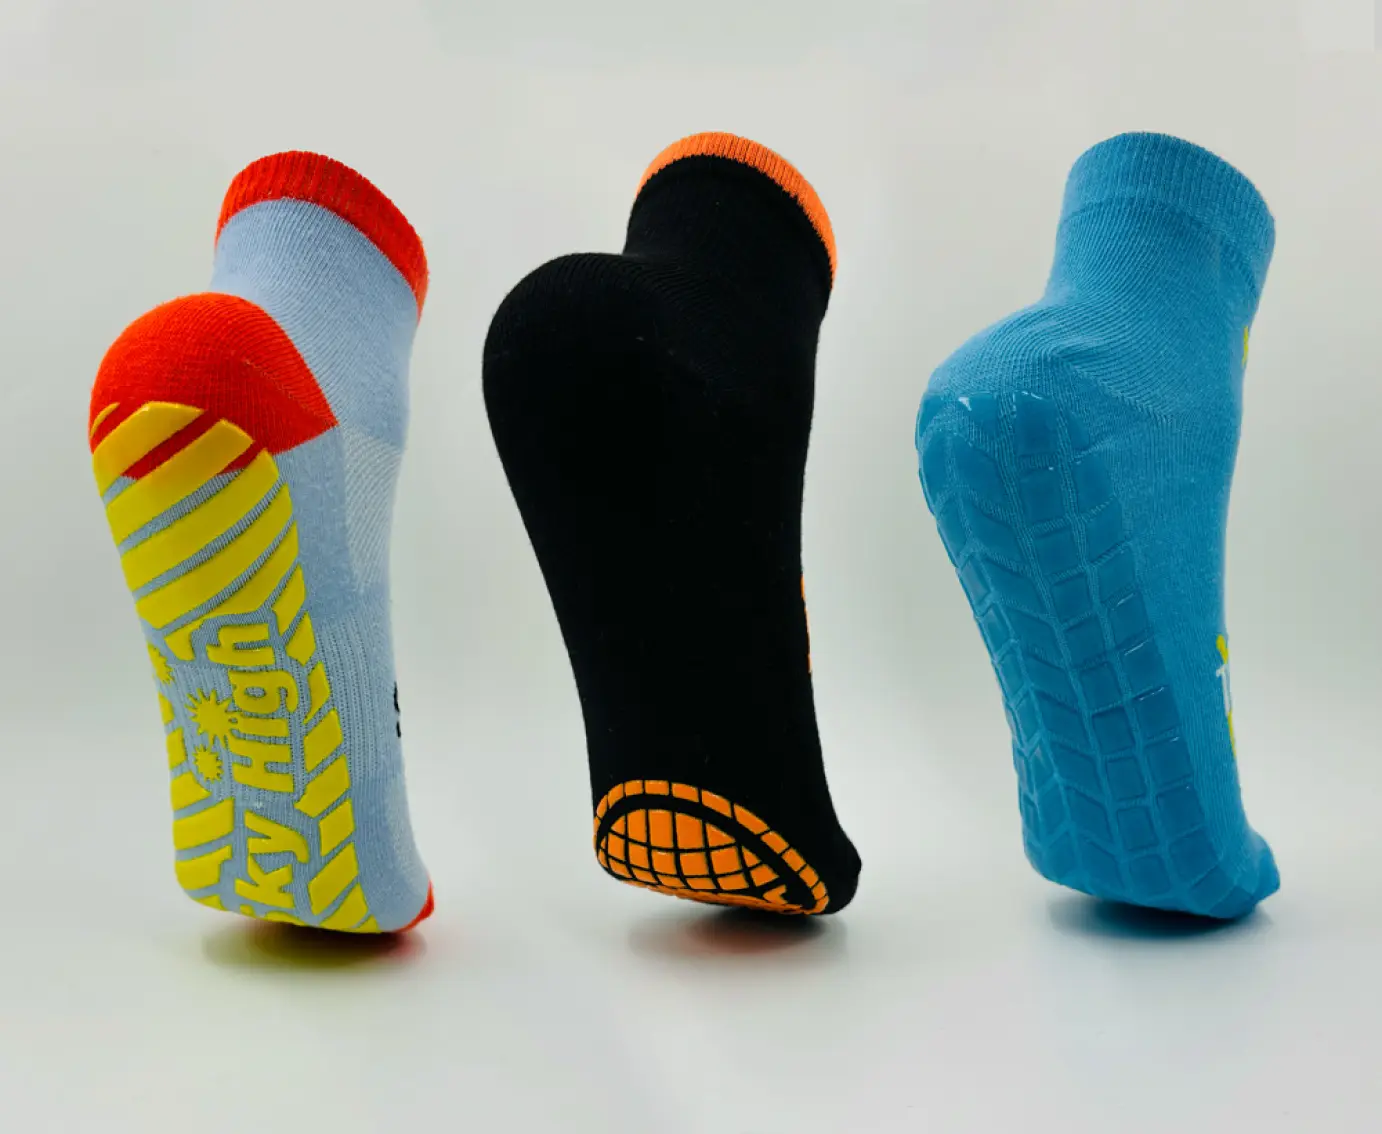 photos which present the different types of grip - grip socks